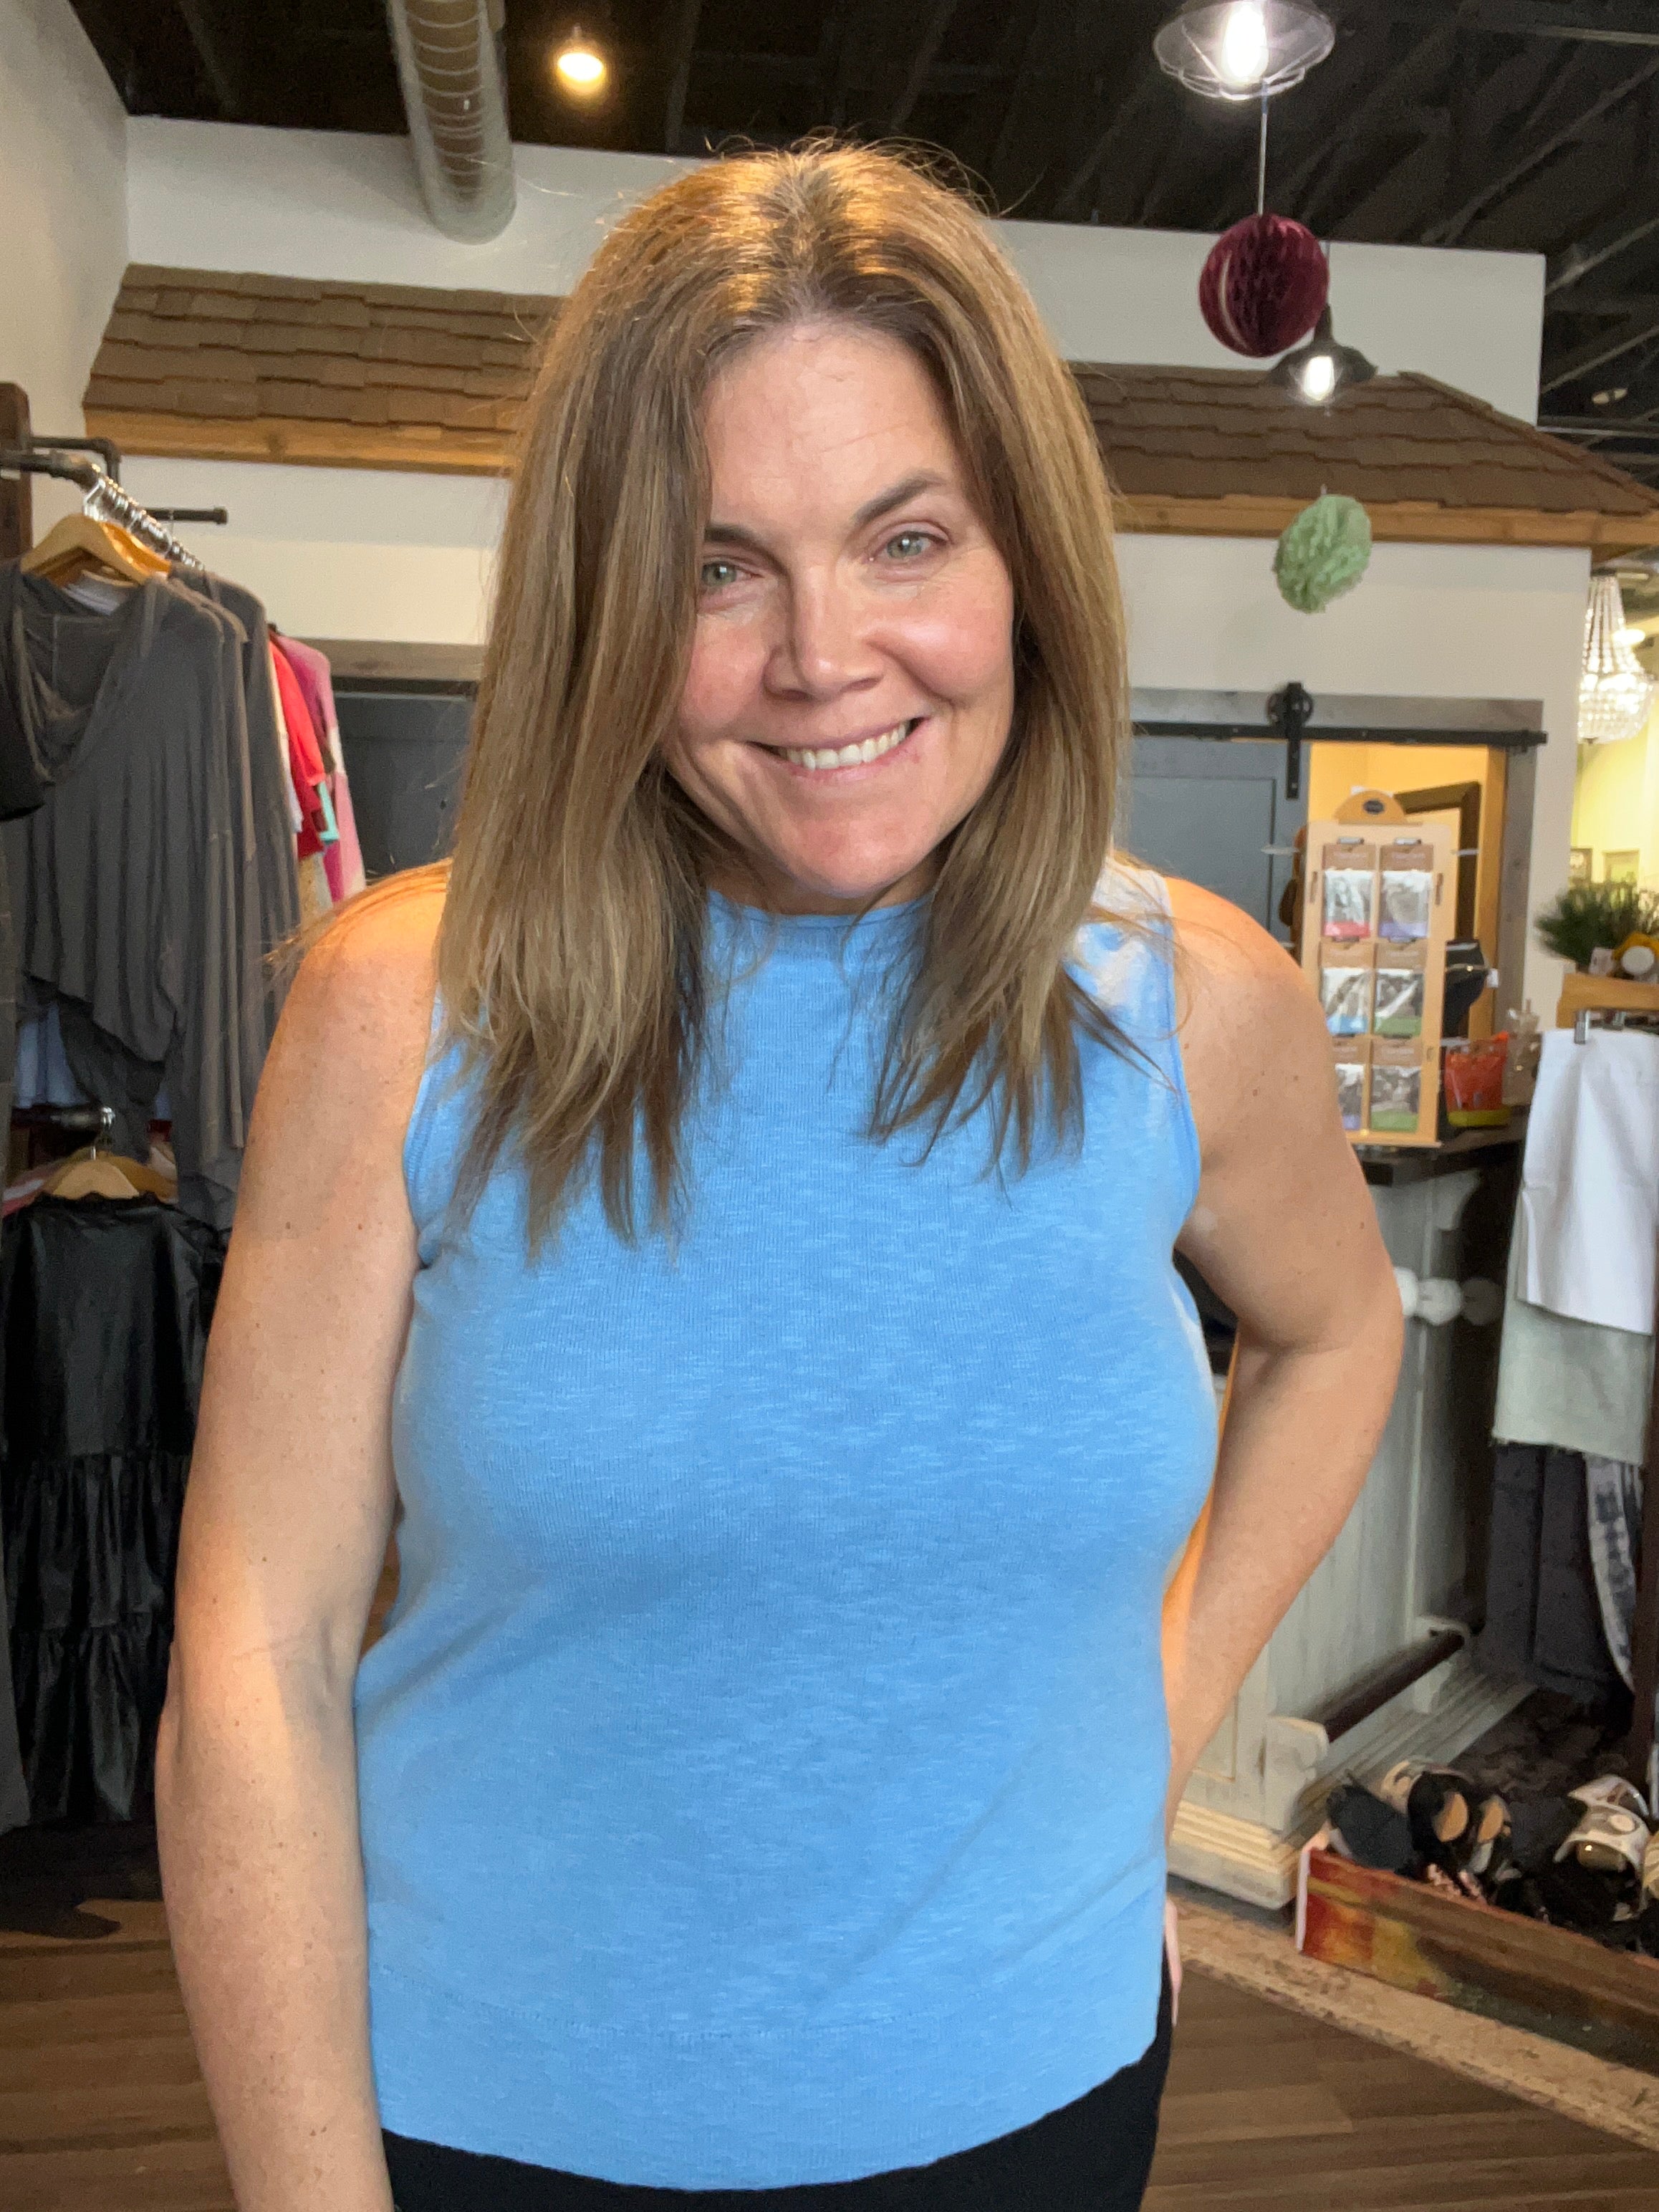 Spring Blue Sweater-Tank Tops-Be Cool-The Funky Zebra Ames, Women's Fashion Boutique in Ames, Iowa